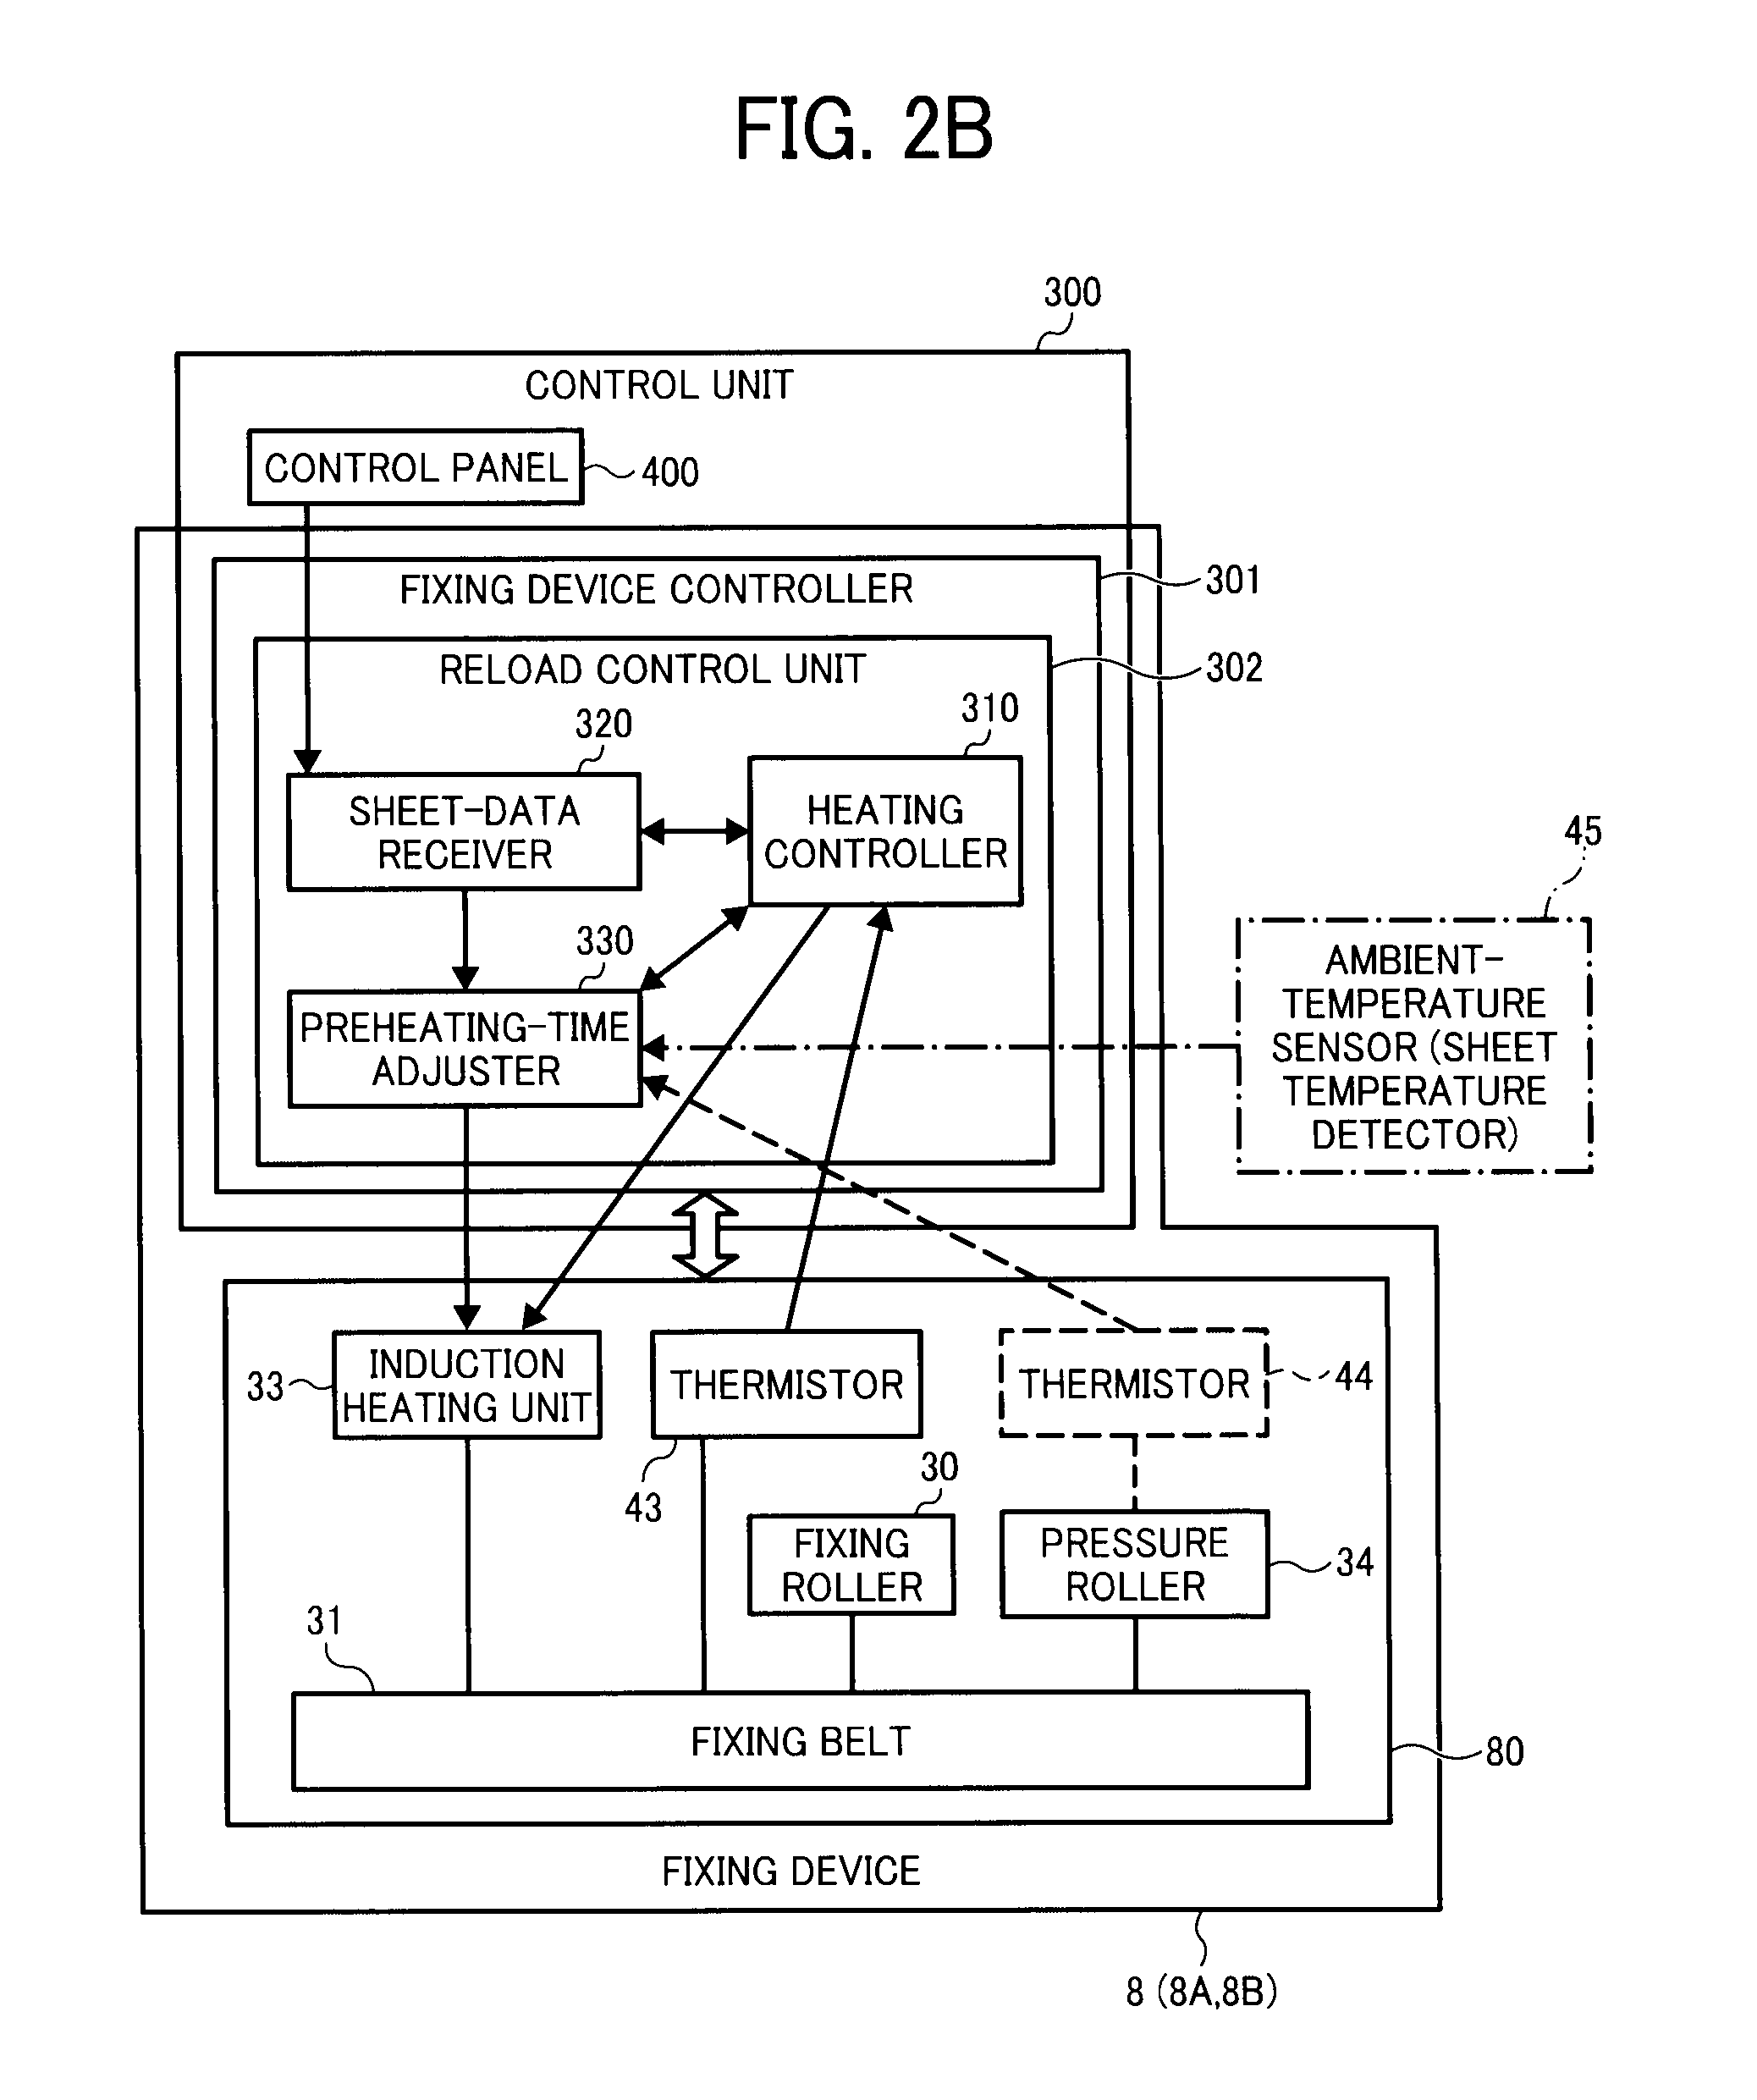 Fixing device, image forming apparatus incorporating same, and control method for fixing device